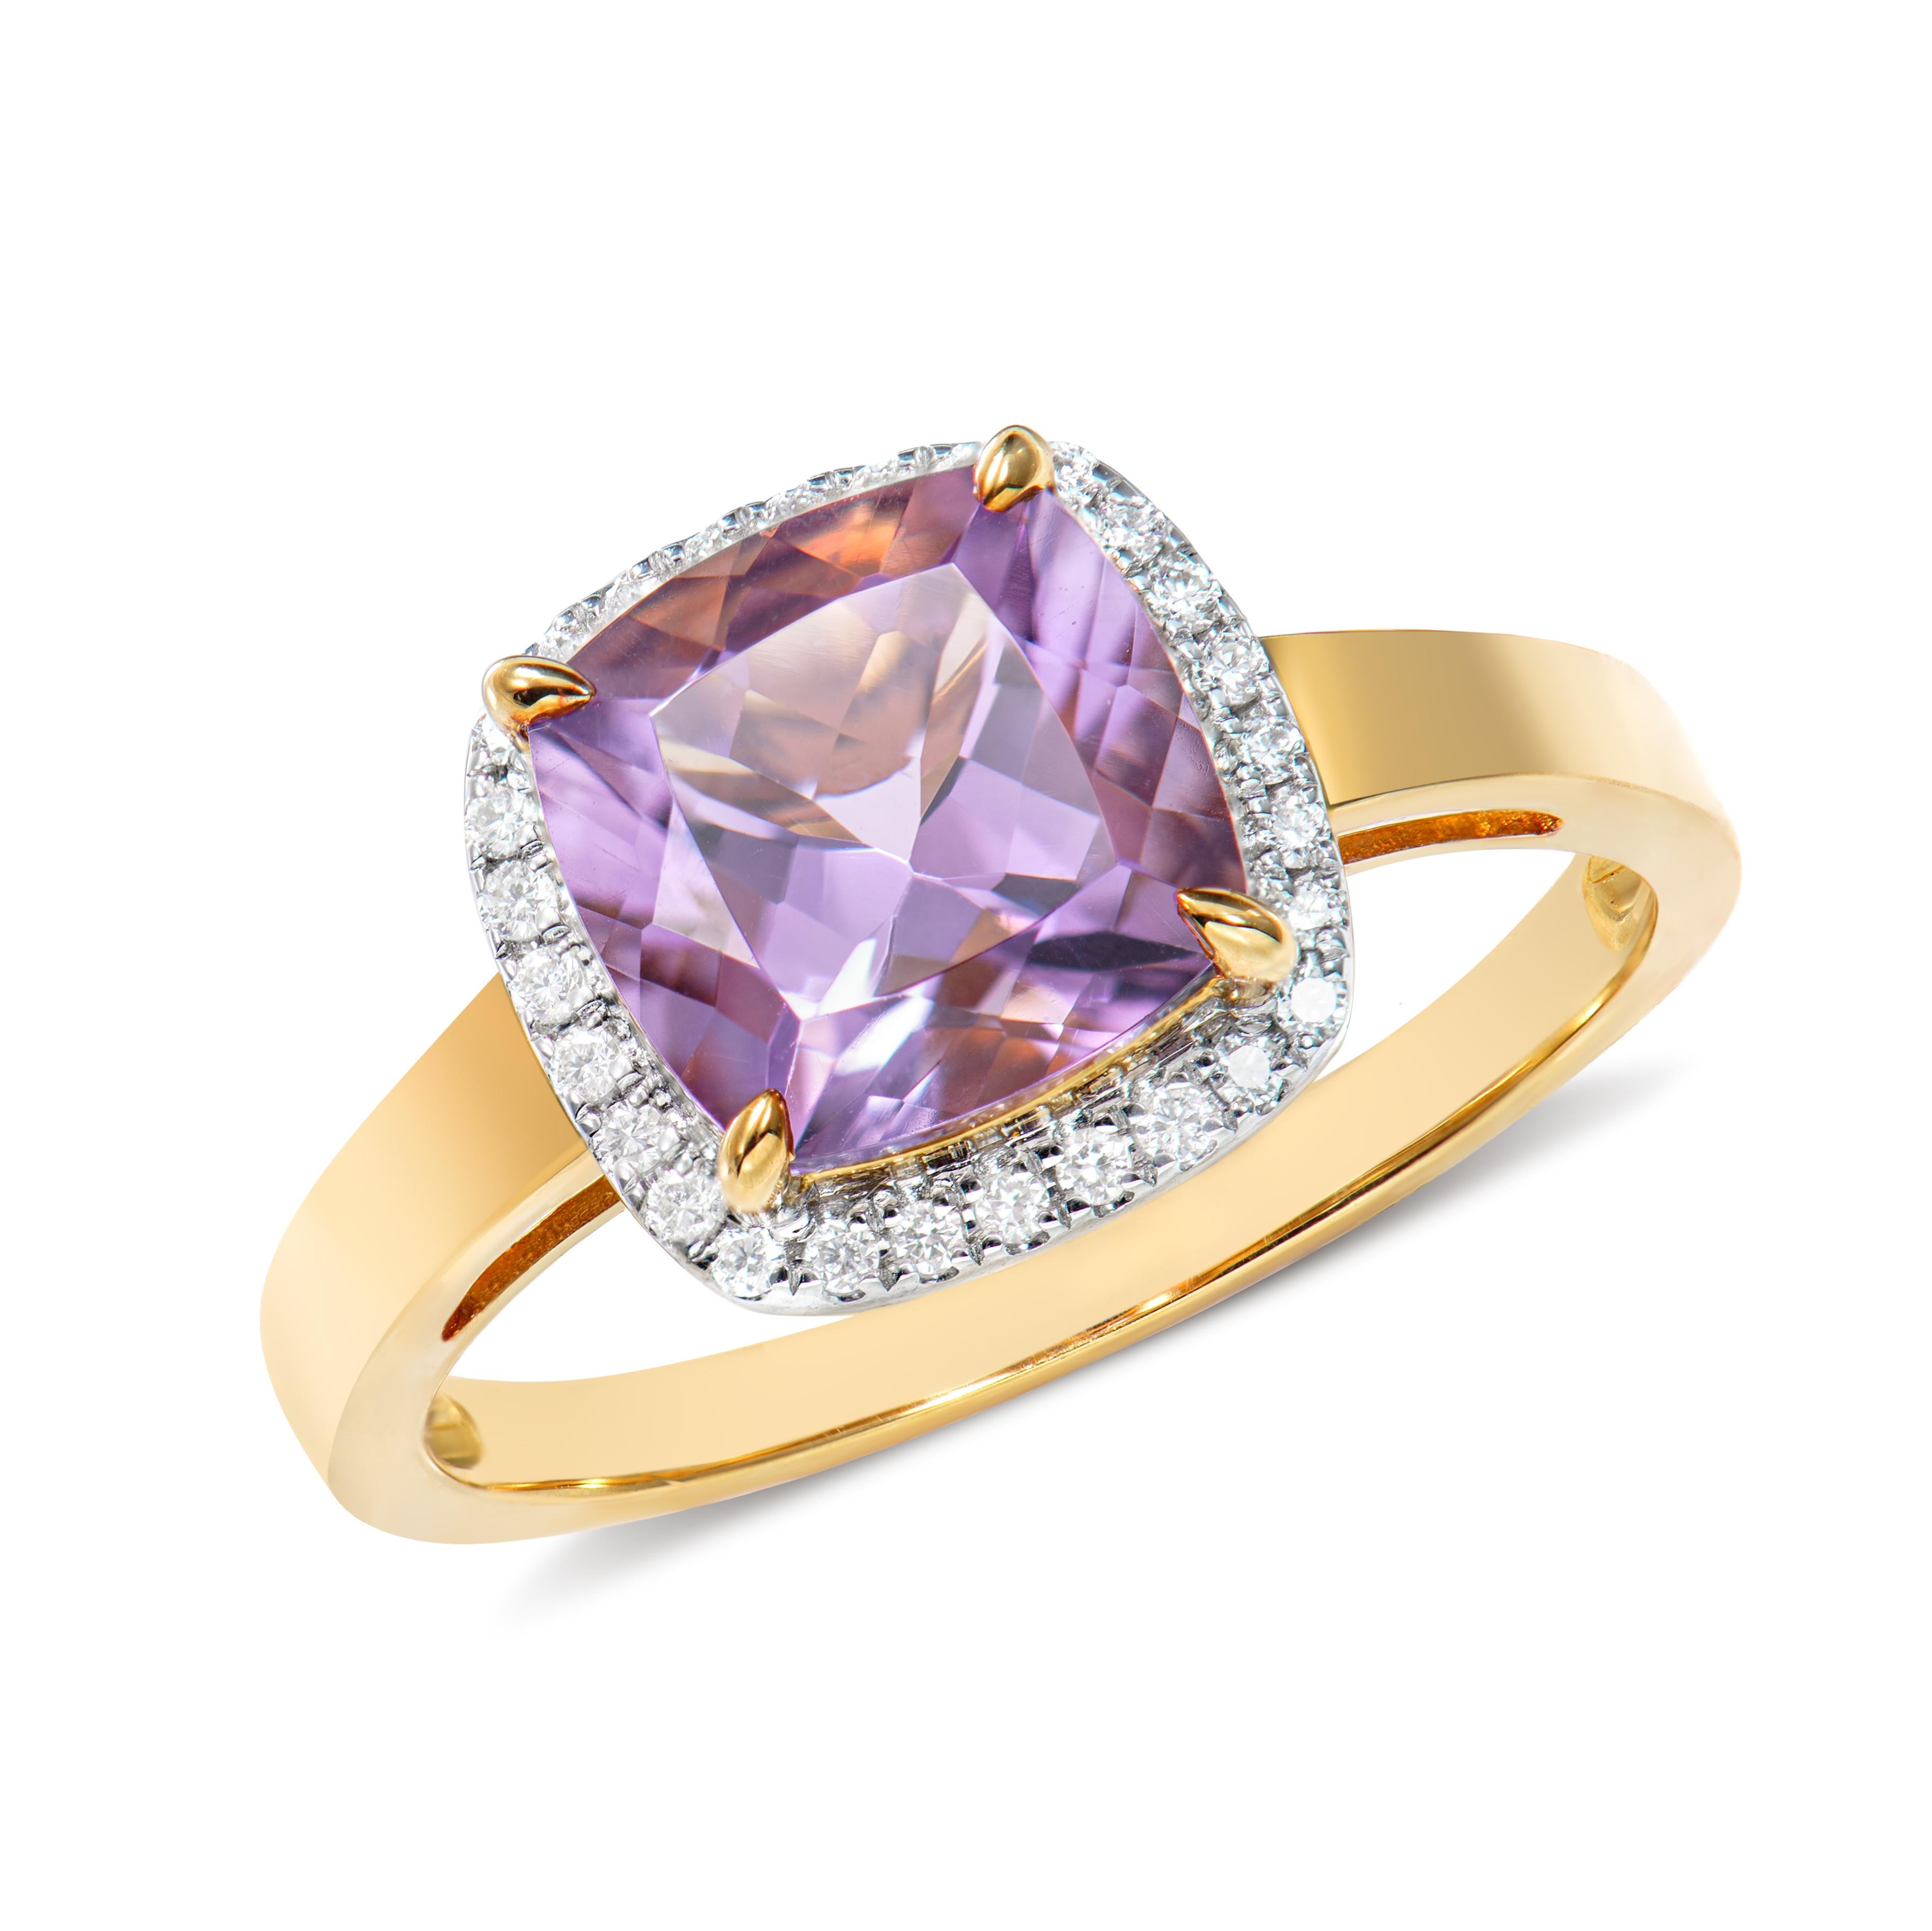 Cushion Cut 2.11 Carat Amethyst Fancy Ring in 18Karat Yellow Gold with White Diamond.   For Sale